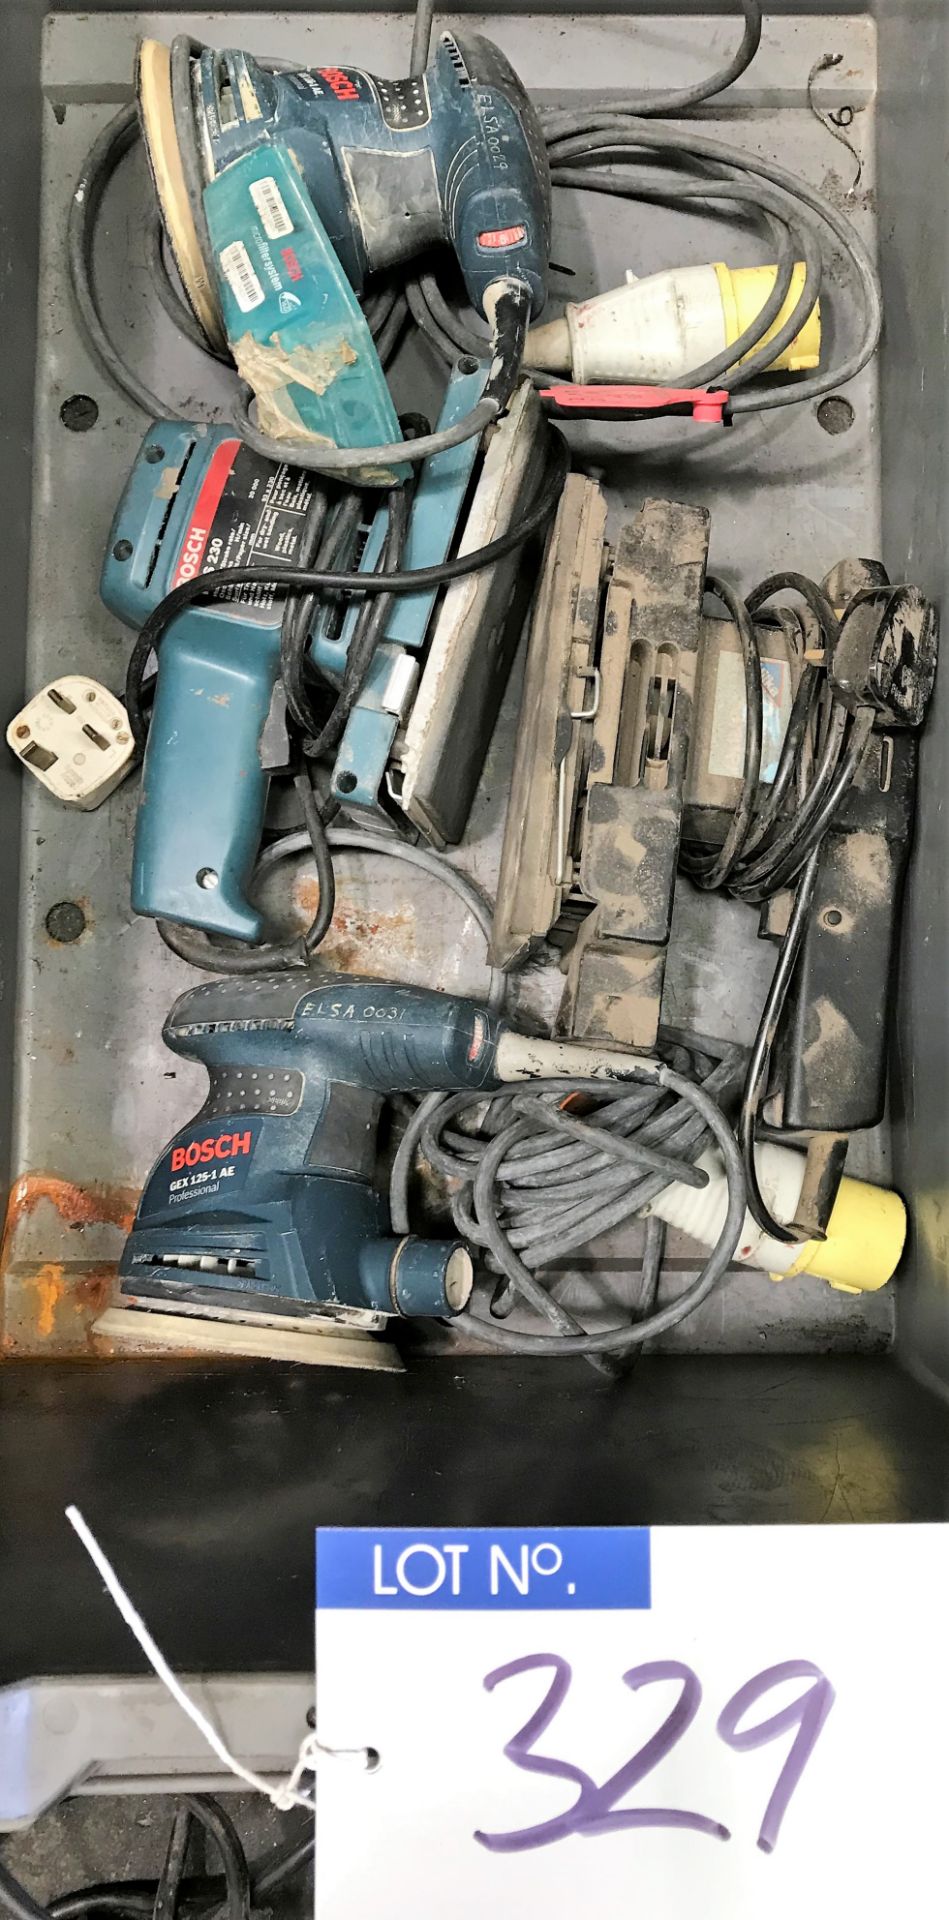 3 Bosch Sanders: 2 GEX125-1AE (110v), 1 PSS230 (240v) with A Hilka Sander (240v)-located at The